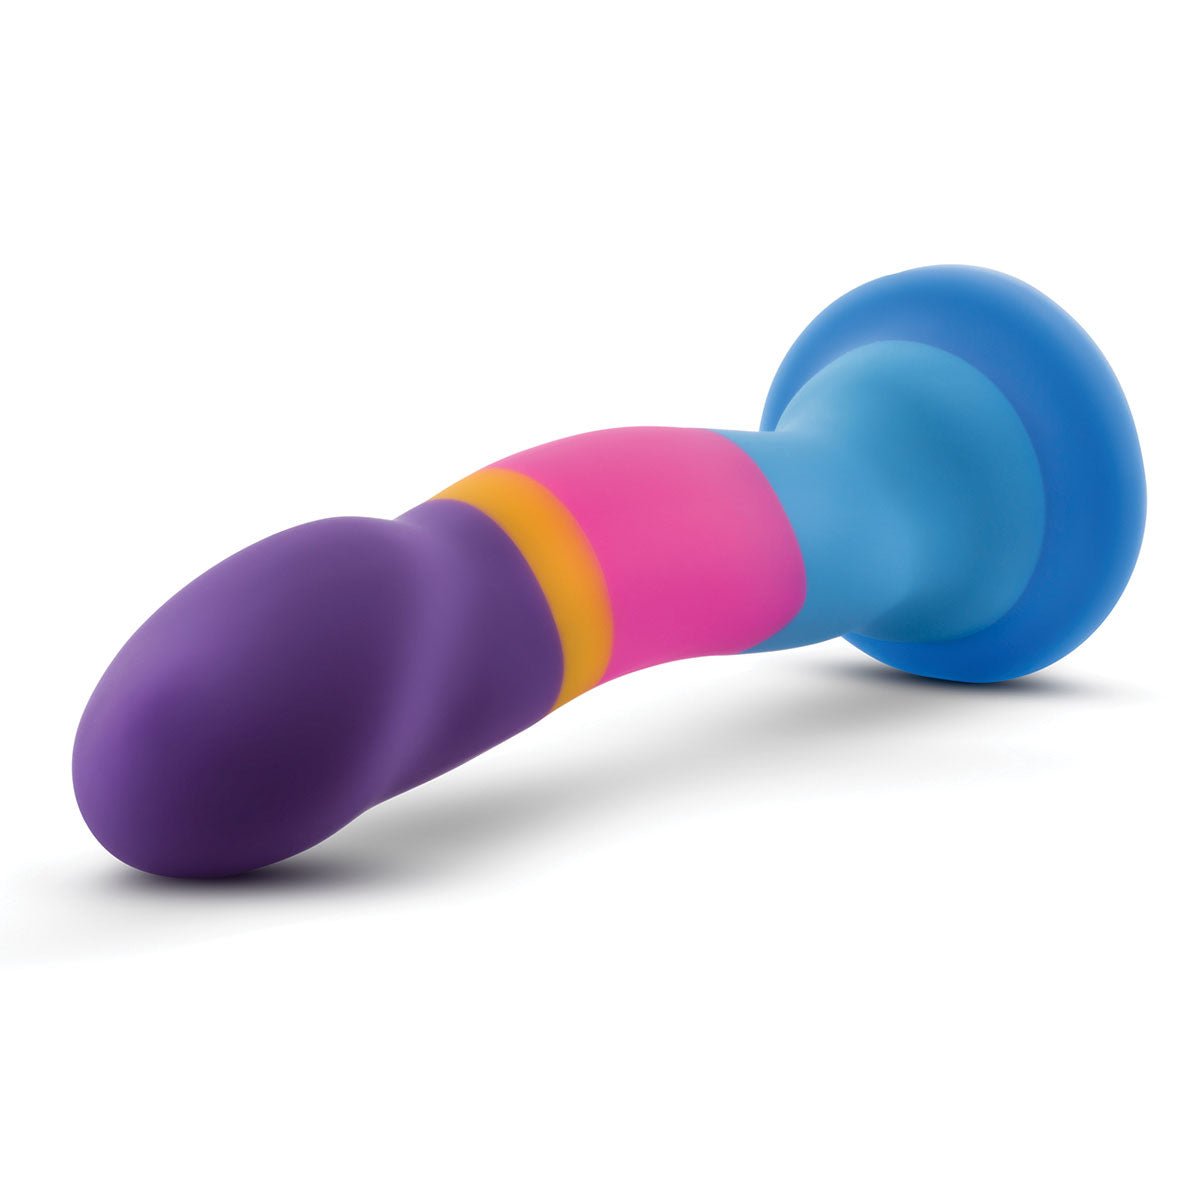 Avant D1 Hot N' Cool Multi-Color Silicone Dildo by Blush